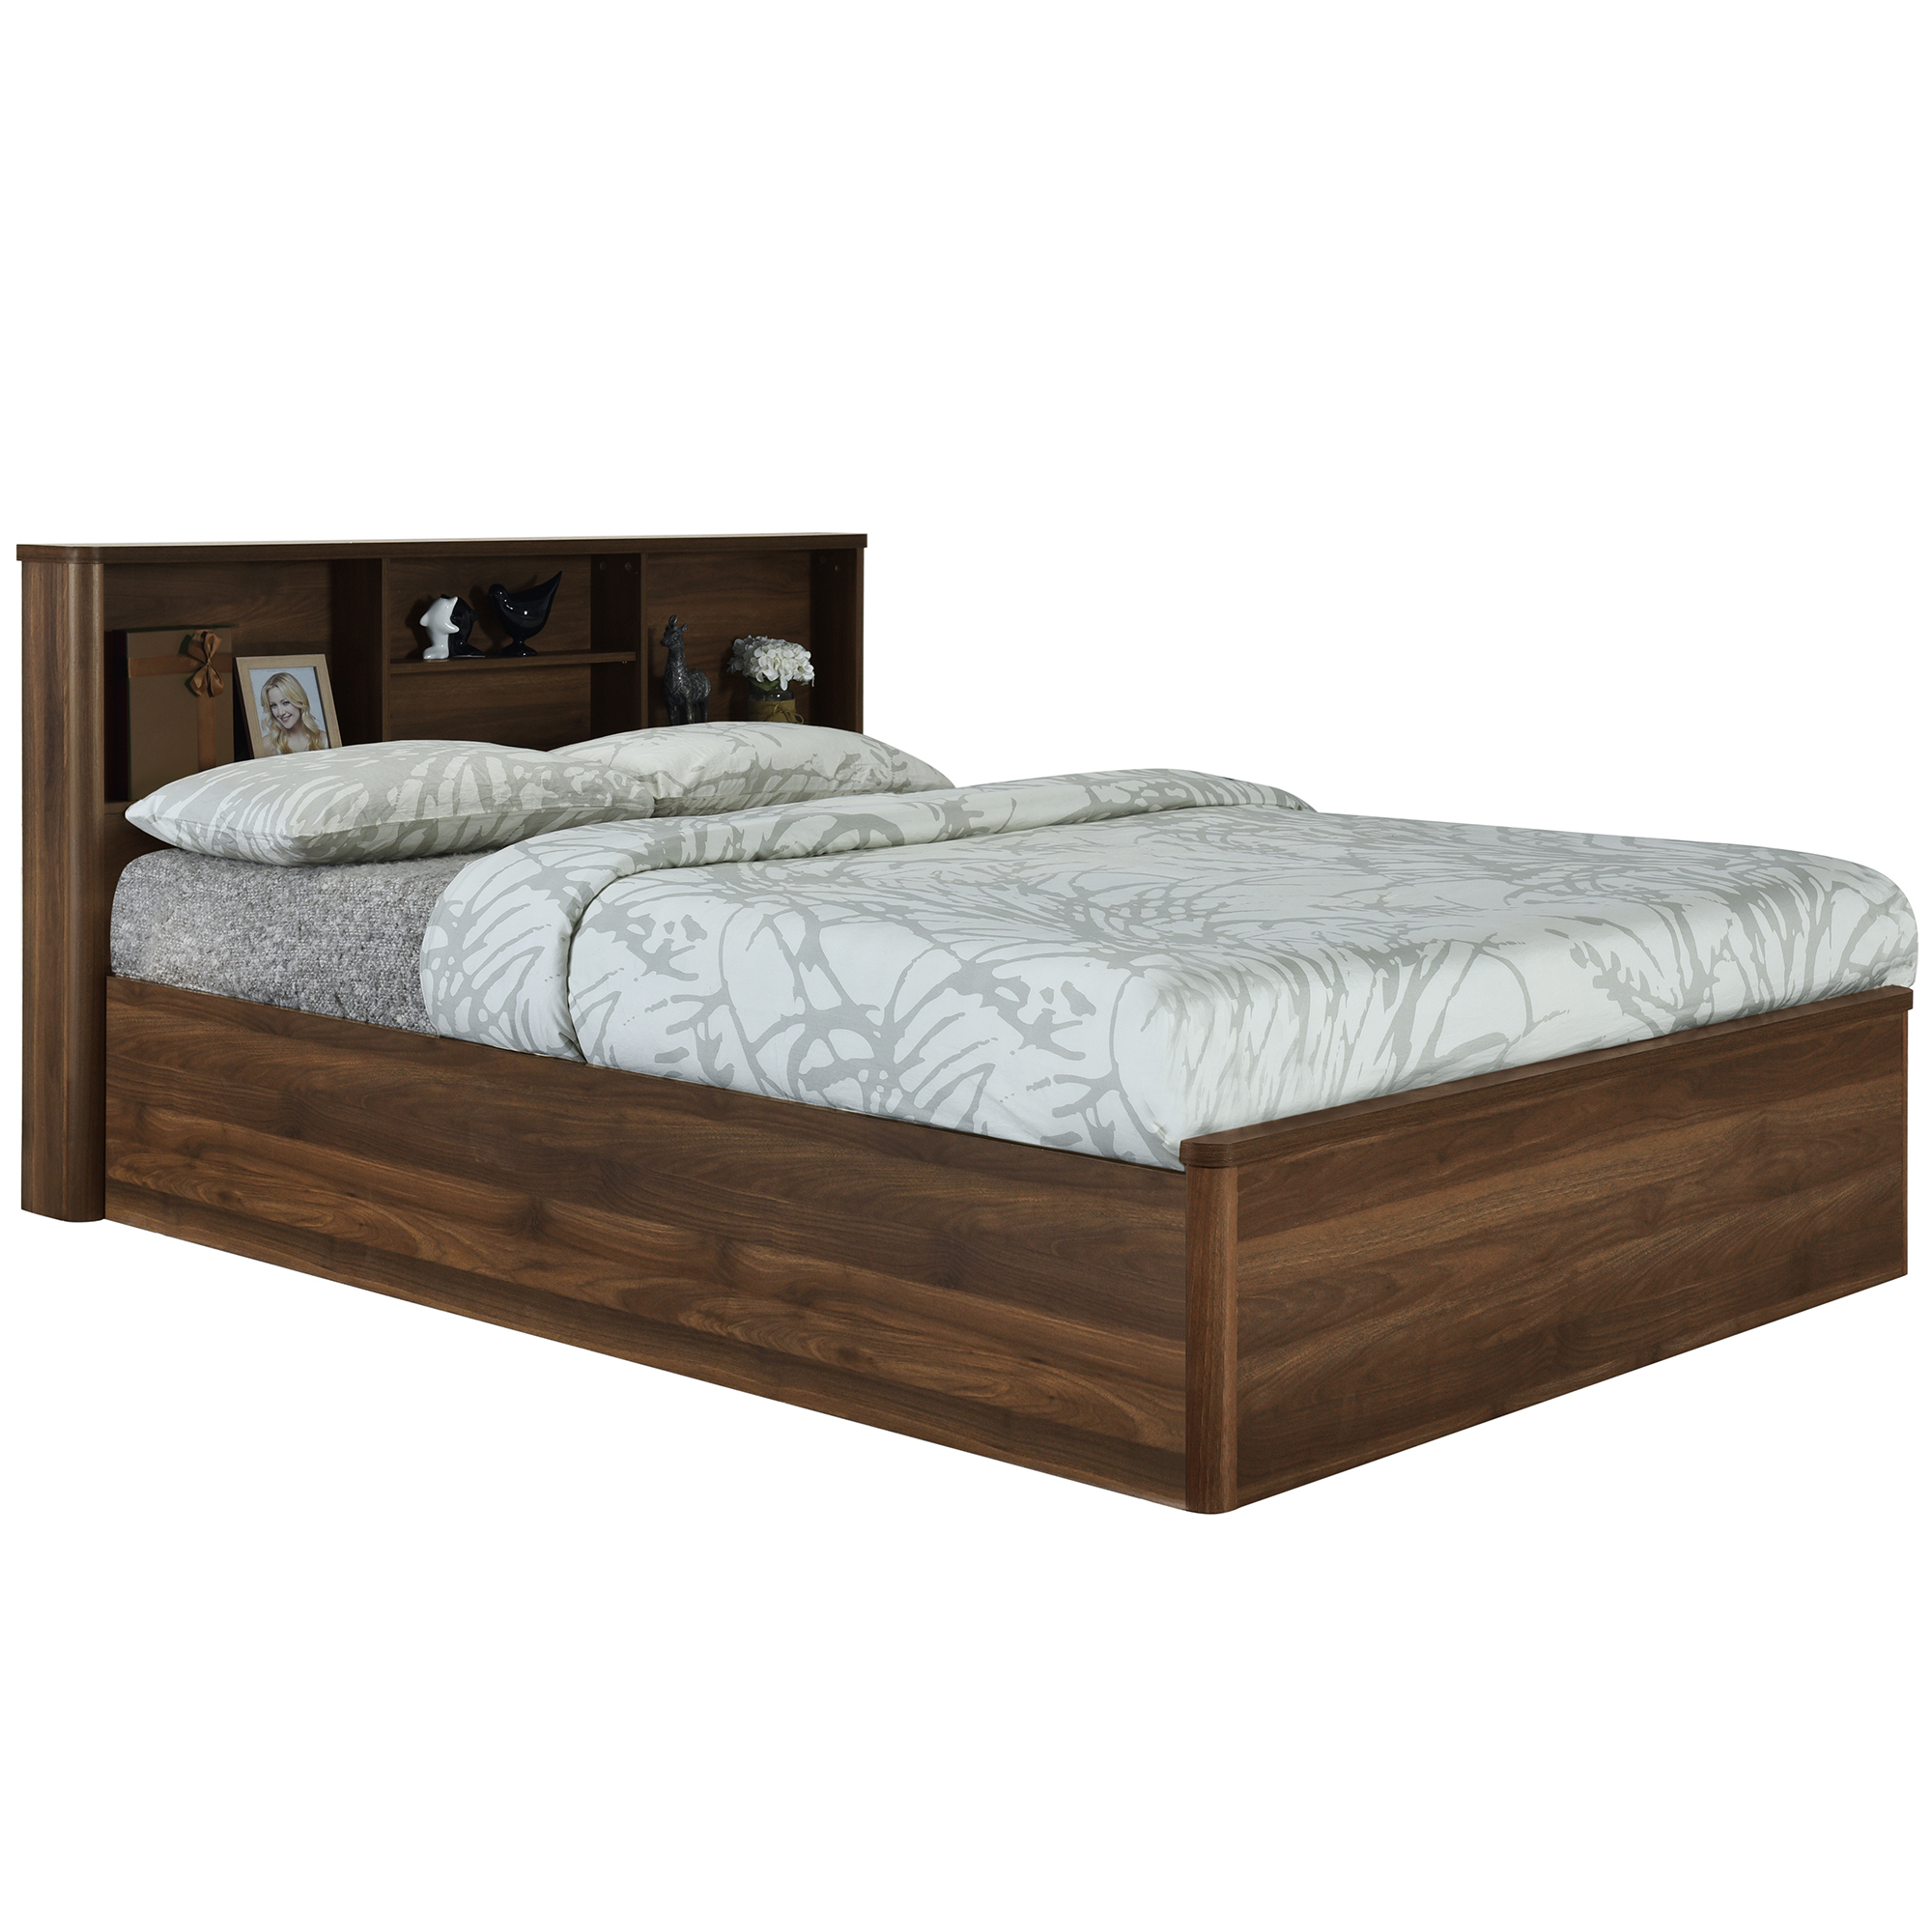 Core Living Anderson Queen Bed With, Full Size Bookshelf Headboard